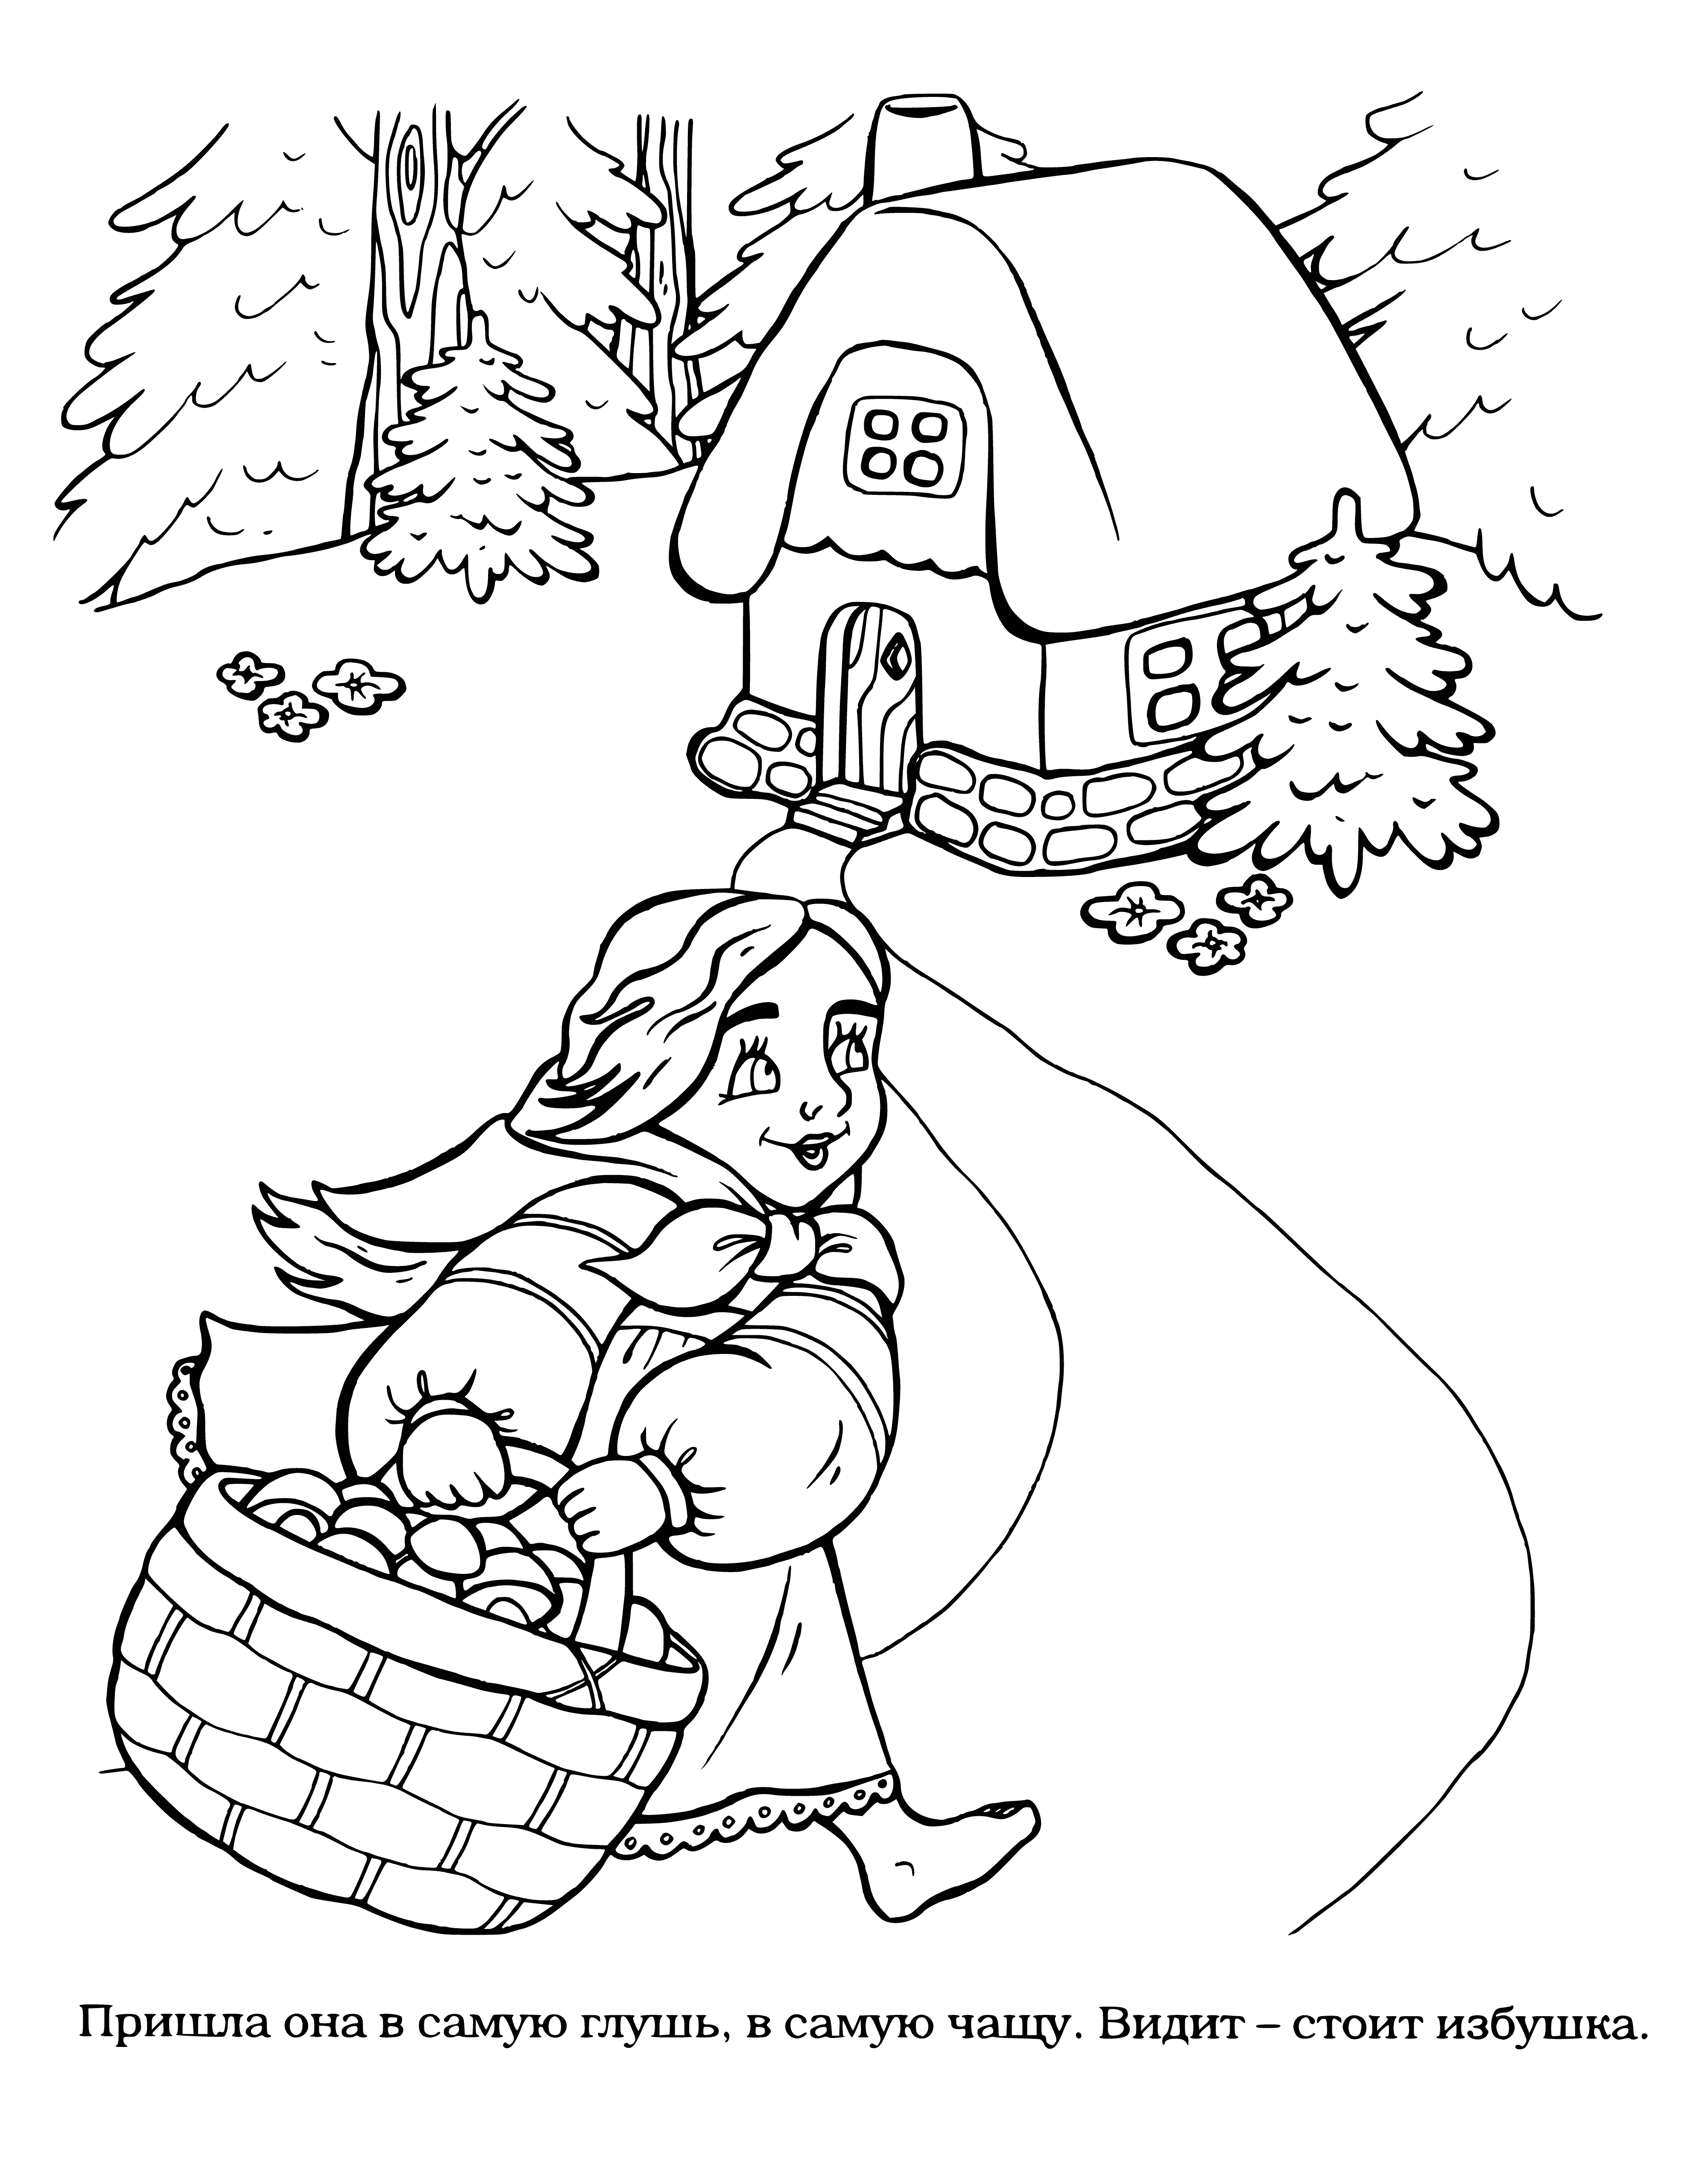 coloring page: Folktale: Bear hut in woods has wooden hut, thatched roof, door and window. Bear inside wears scarf and hat.